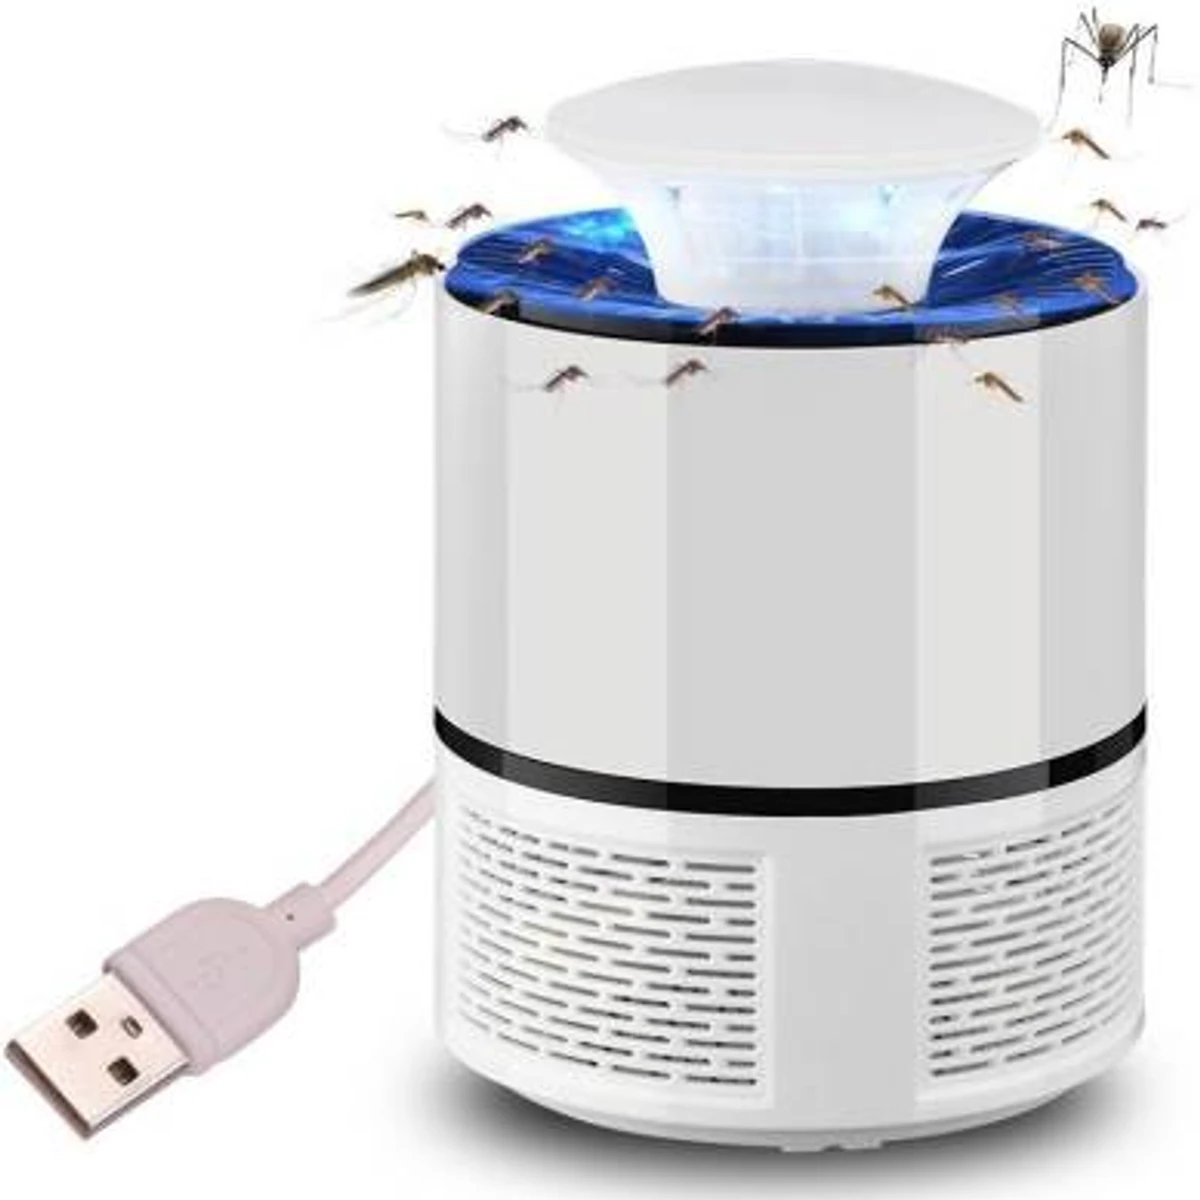 Sutify Mosquito Killer Lamp ,USB Mosquito Lamp, Bug Mosquito Trap,LED Night Light for Home Bedroom Office(White)